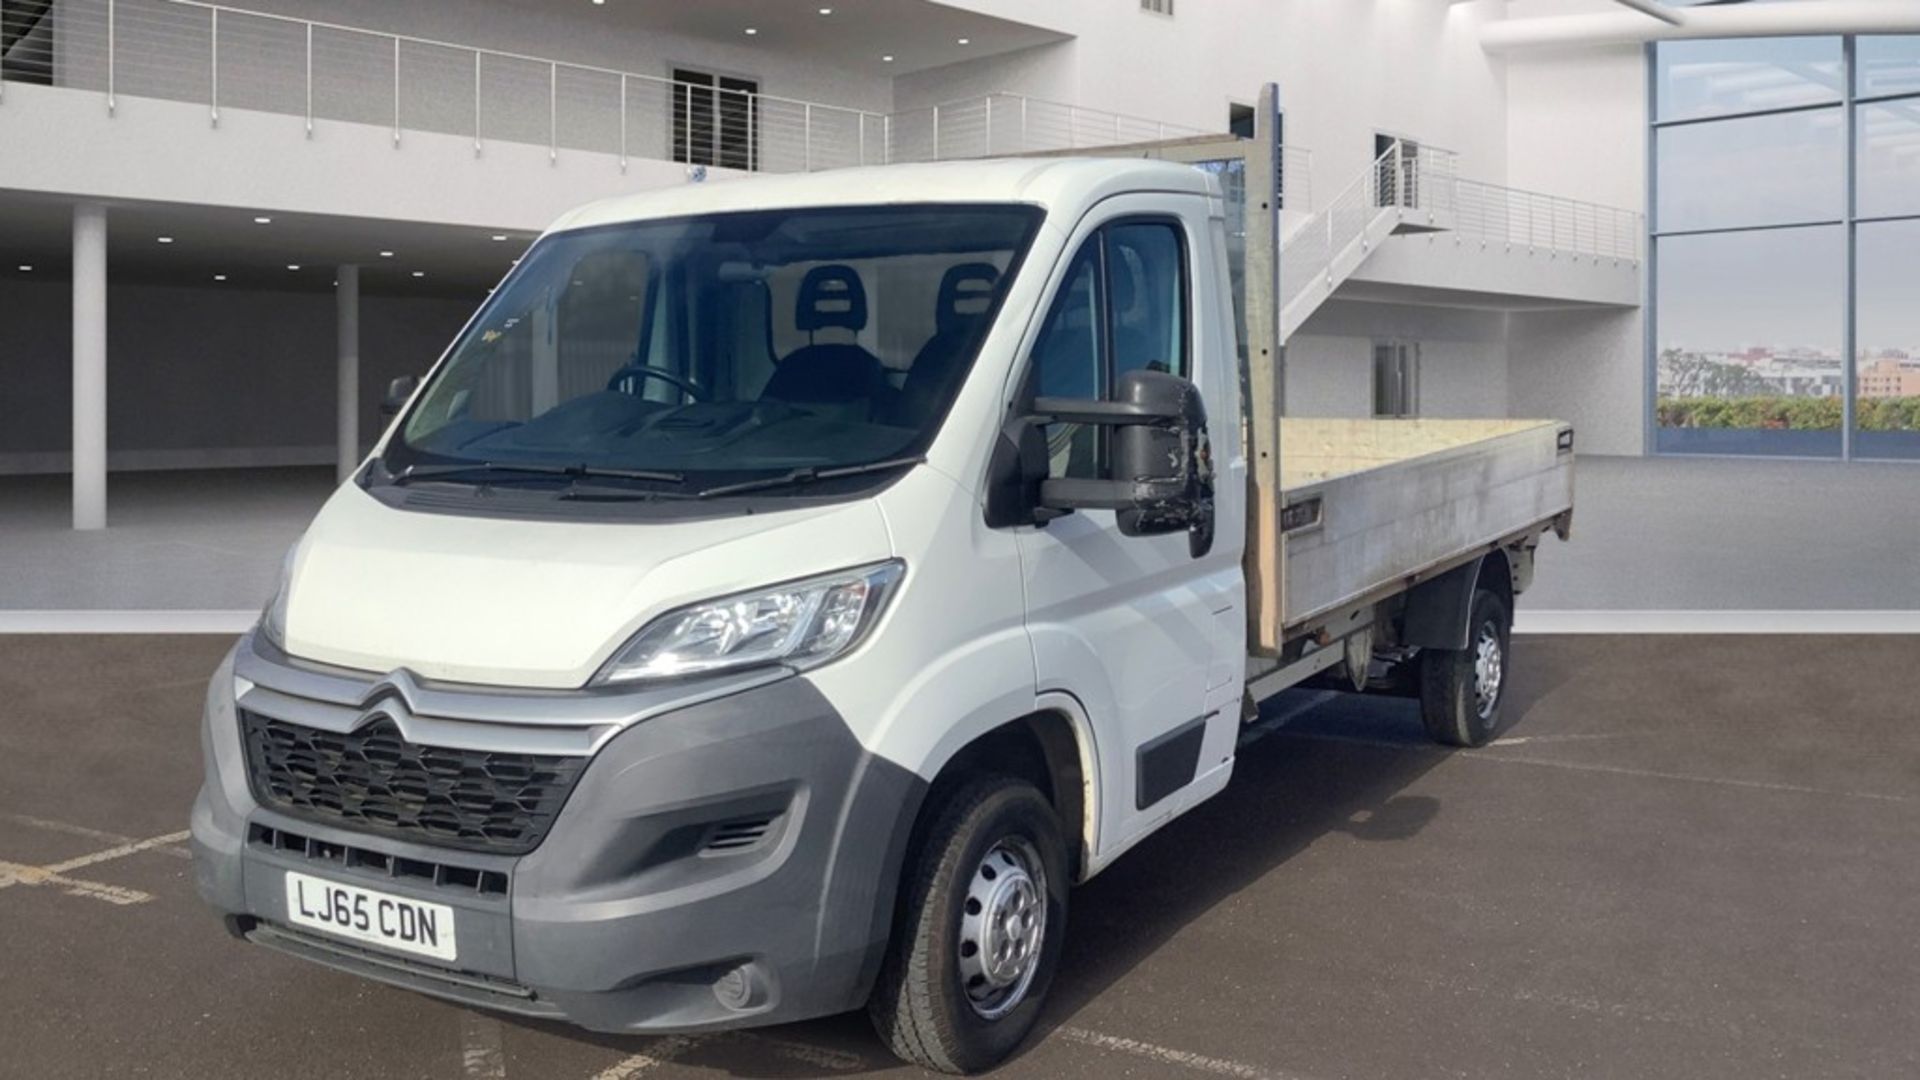 ** ON SALE ** Citroen Relay 2.2 HDI 130 L3 Alloy Dropside 2015 '65 Reg' - Only 96,629 Miles - Image 2 of 9